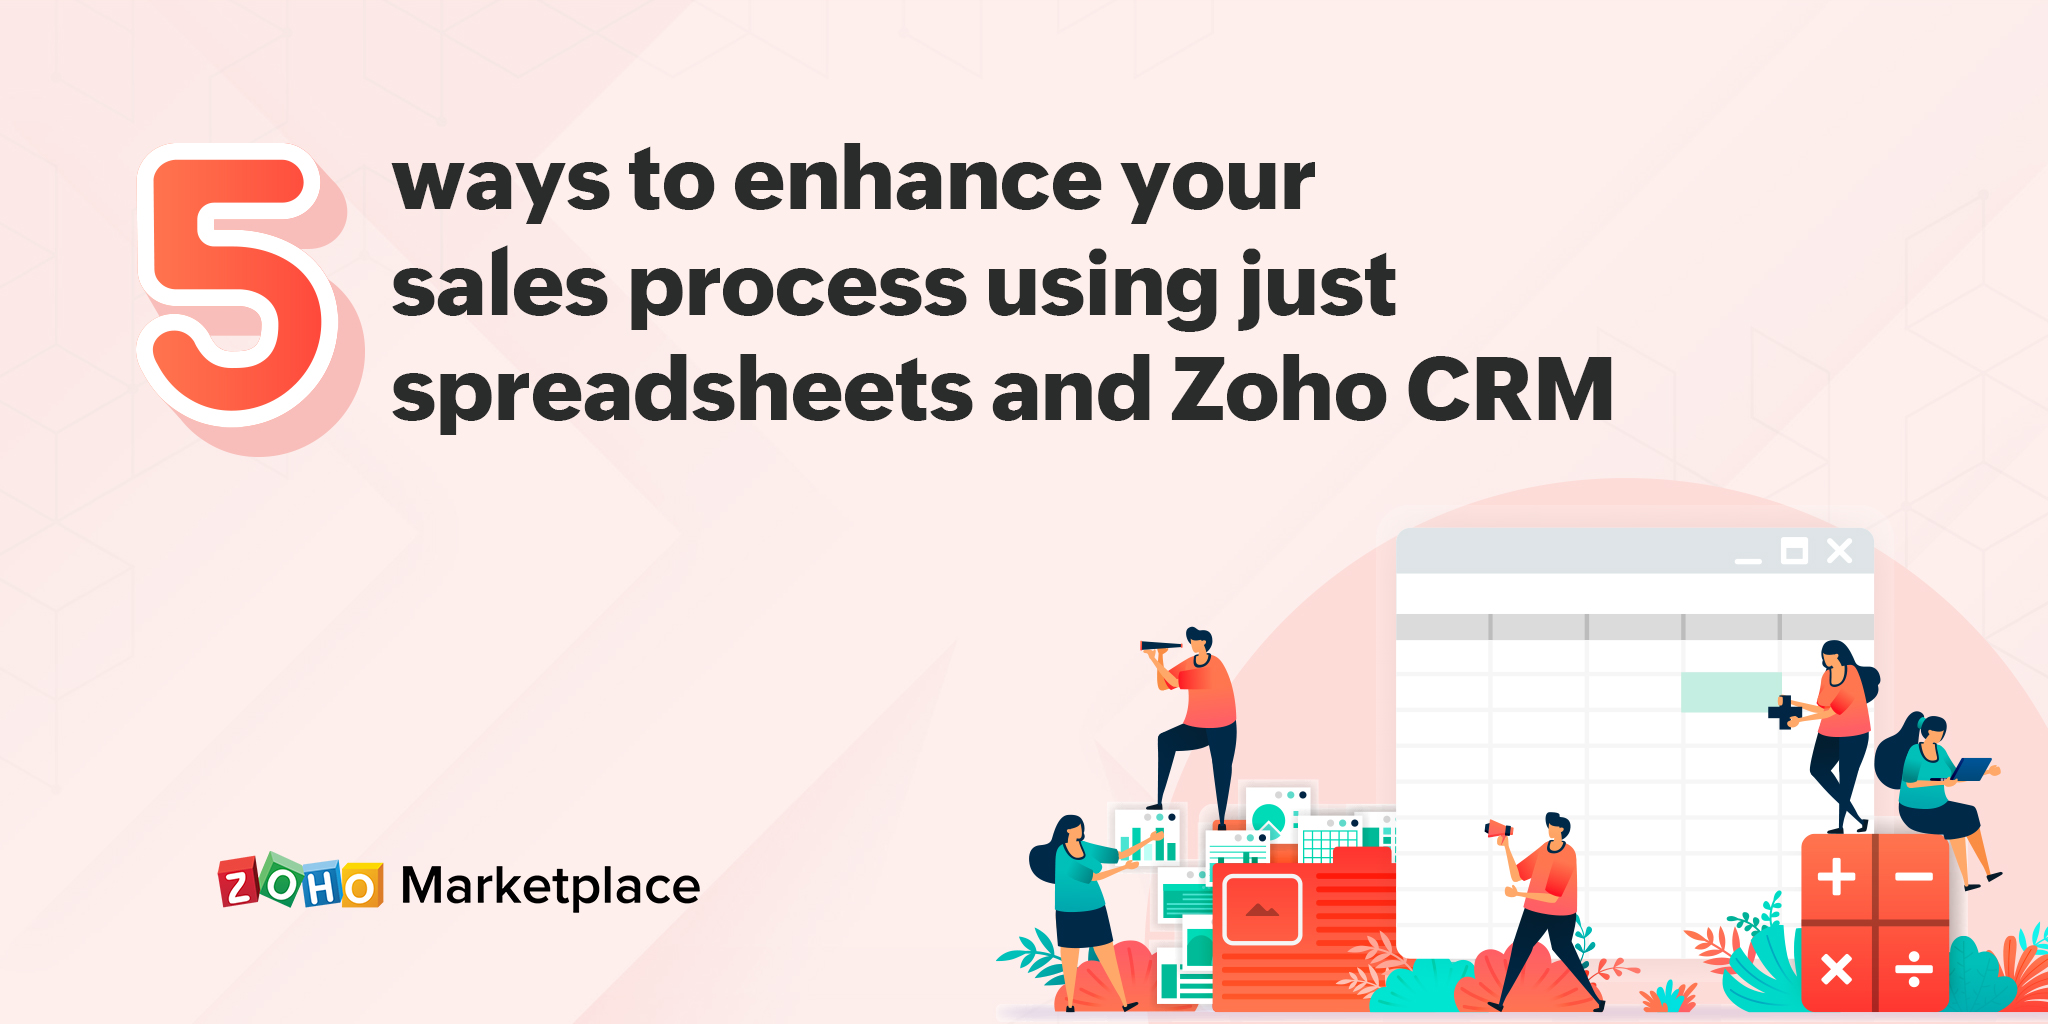 ProTips: 5 ways to enhance your sales process using just spreadsheets and Zoho CRM